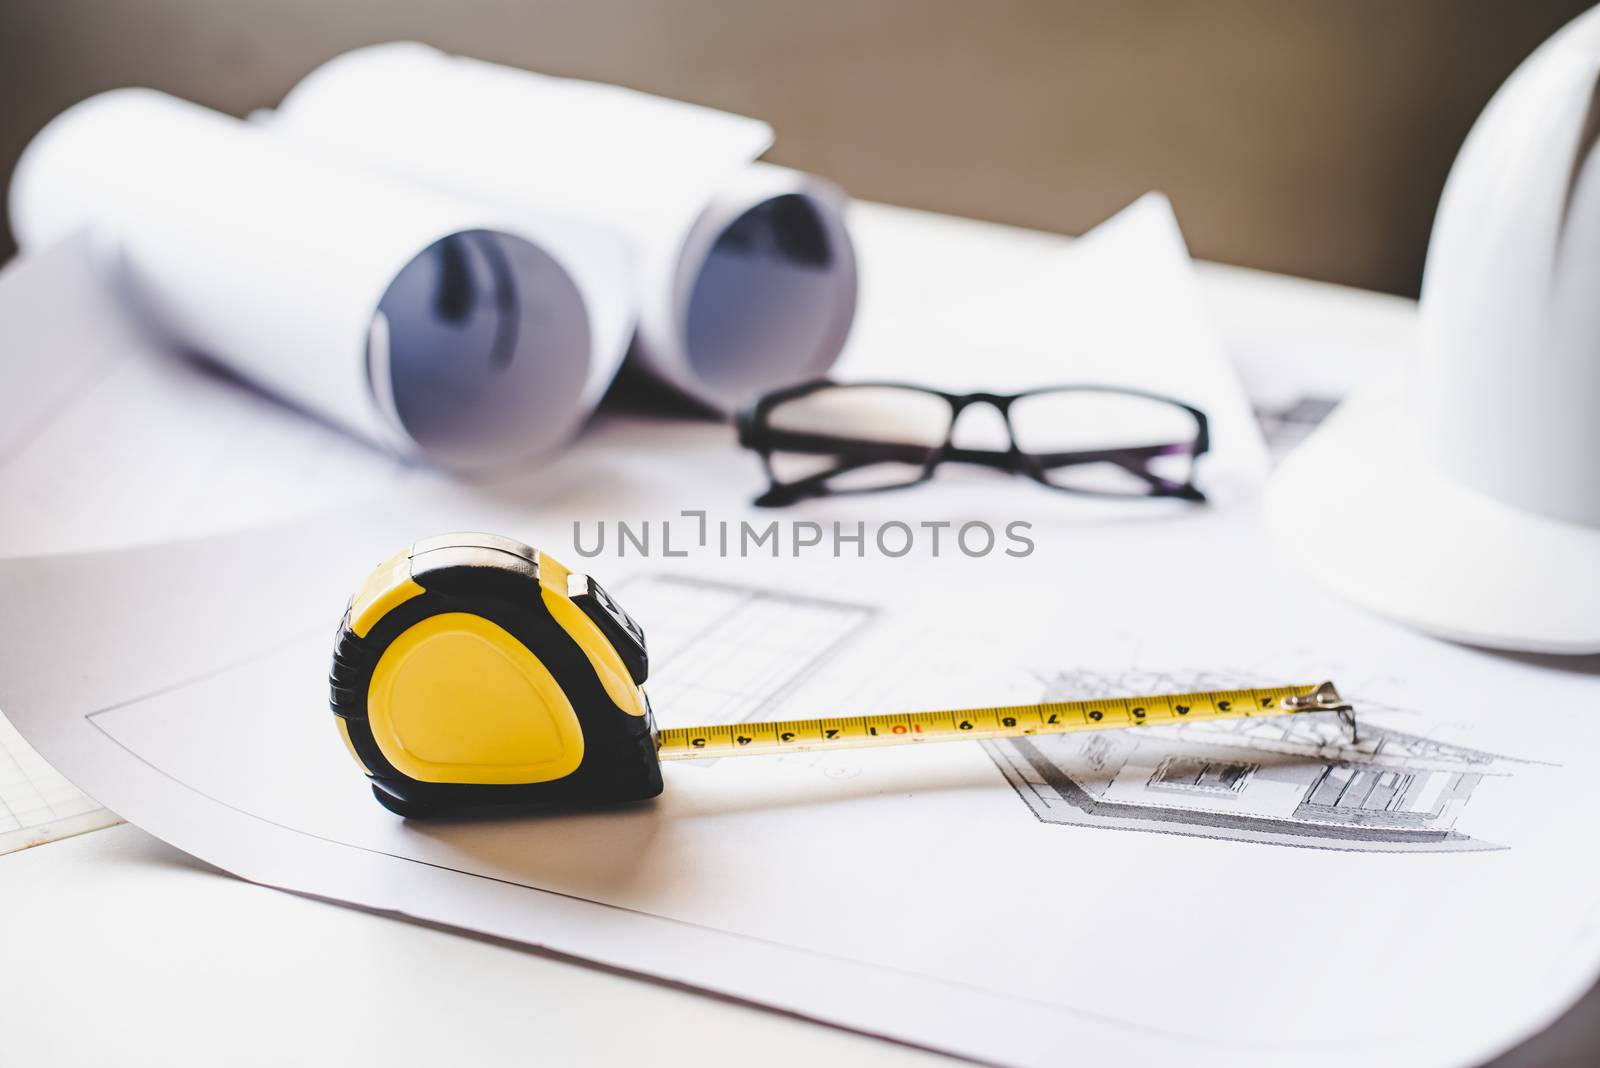  tape measure is placed on the work table with a house plan designed Including engineering equipment